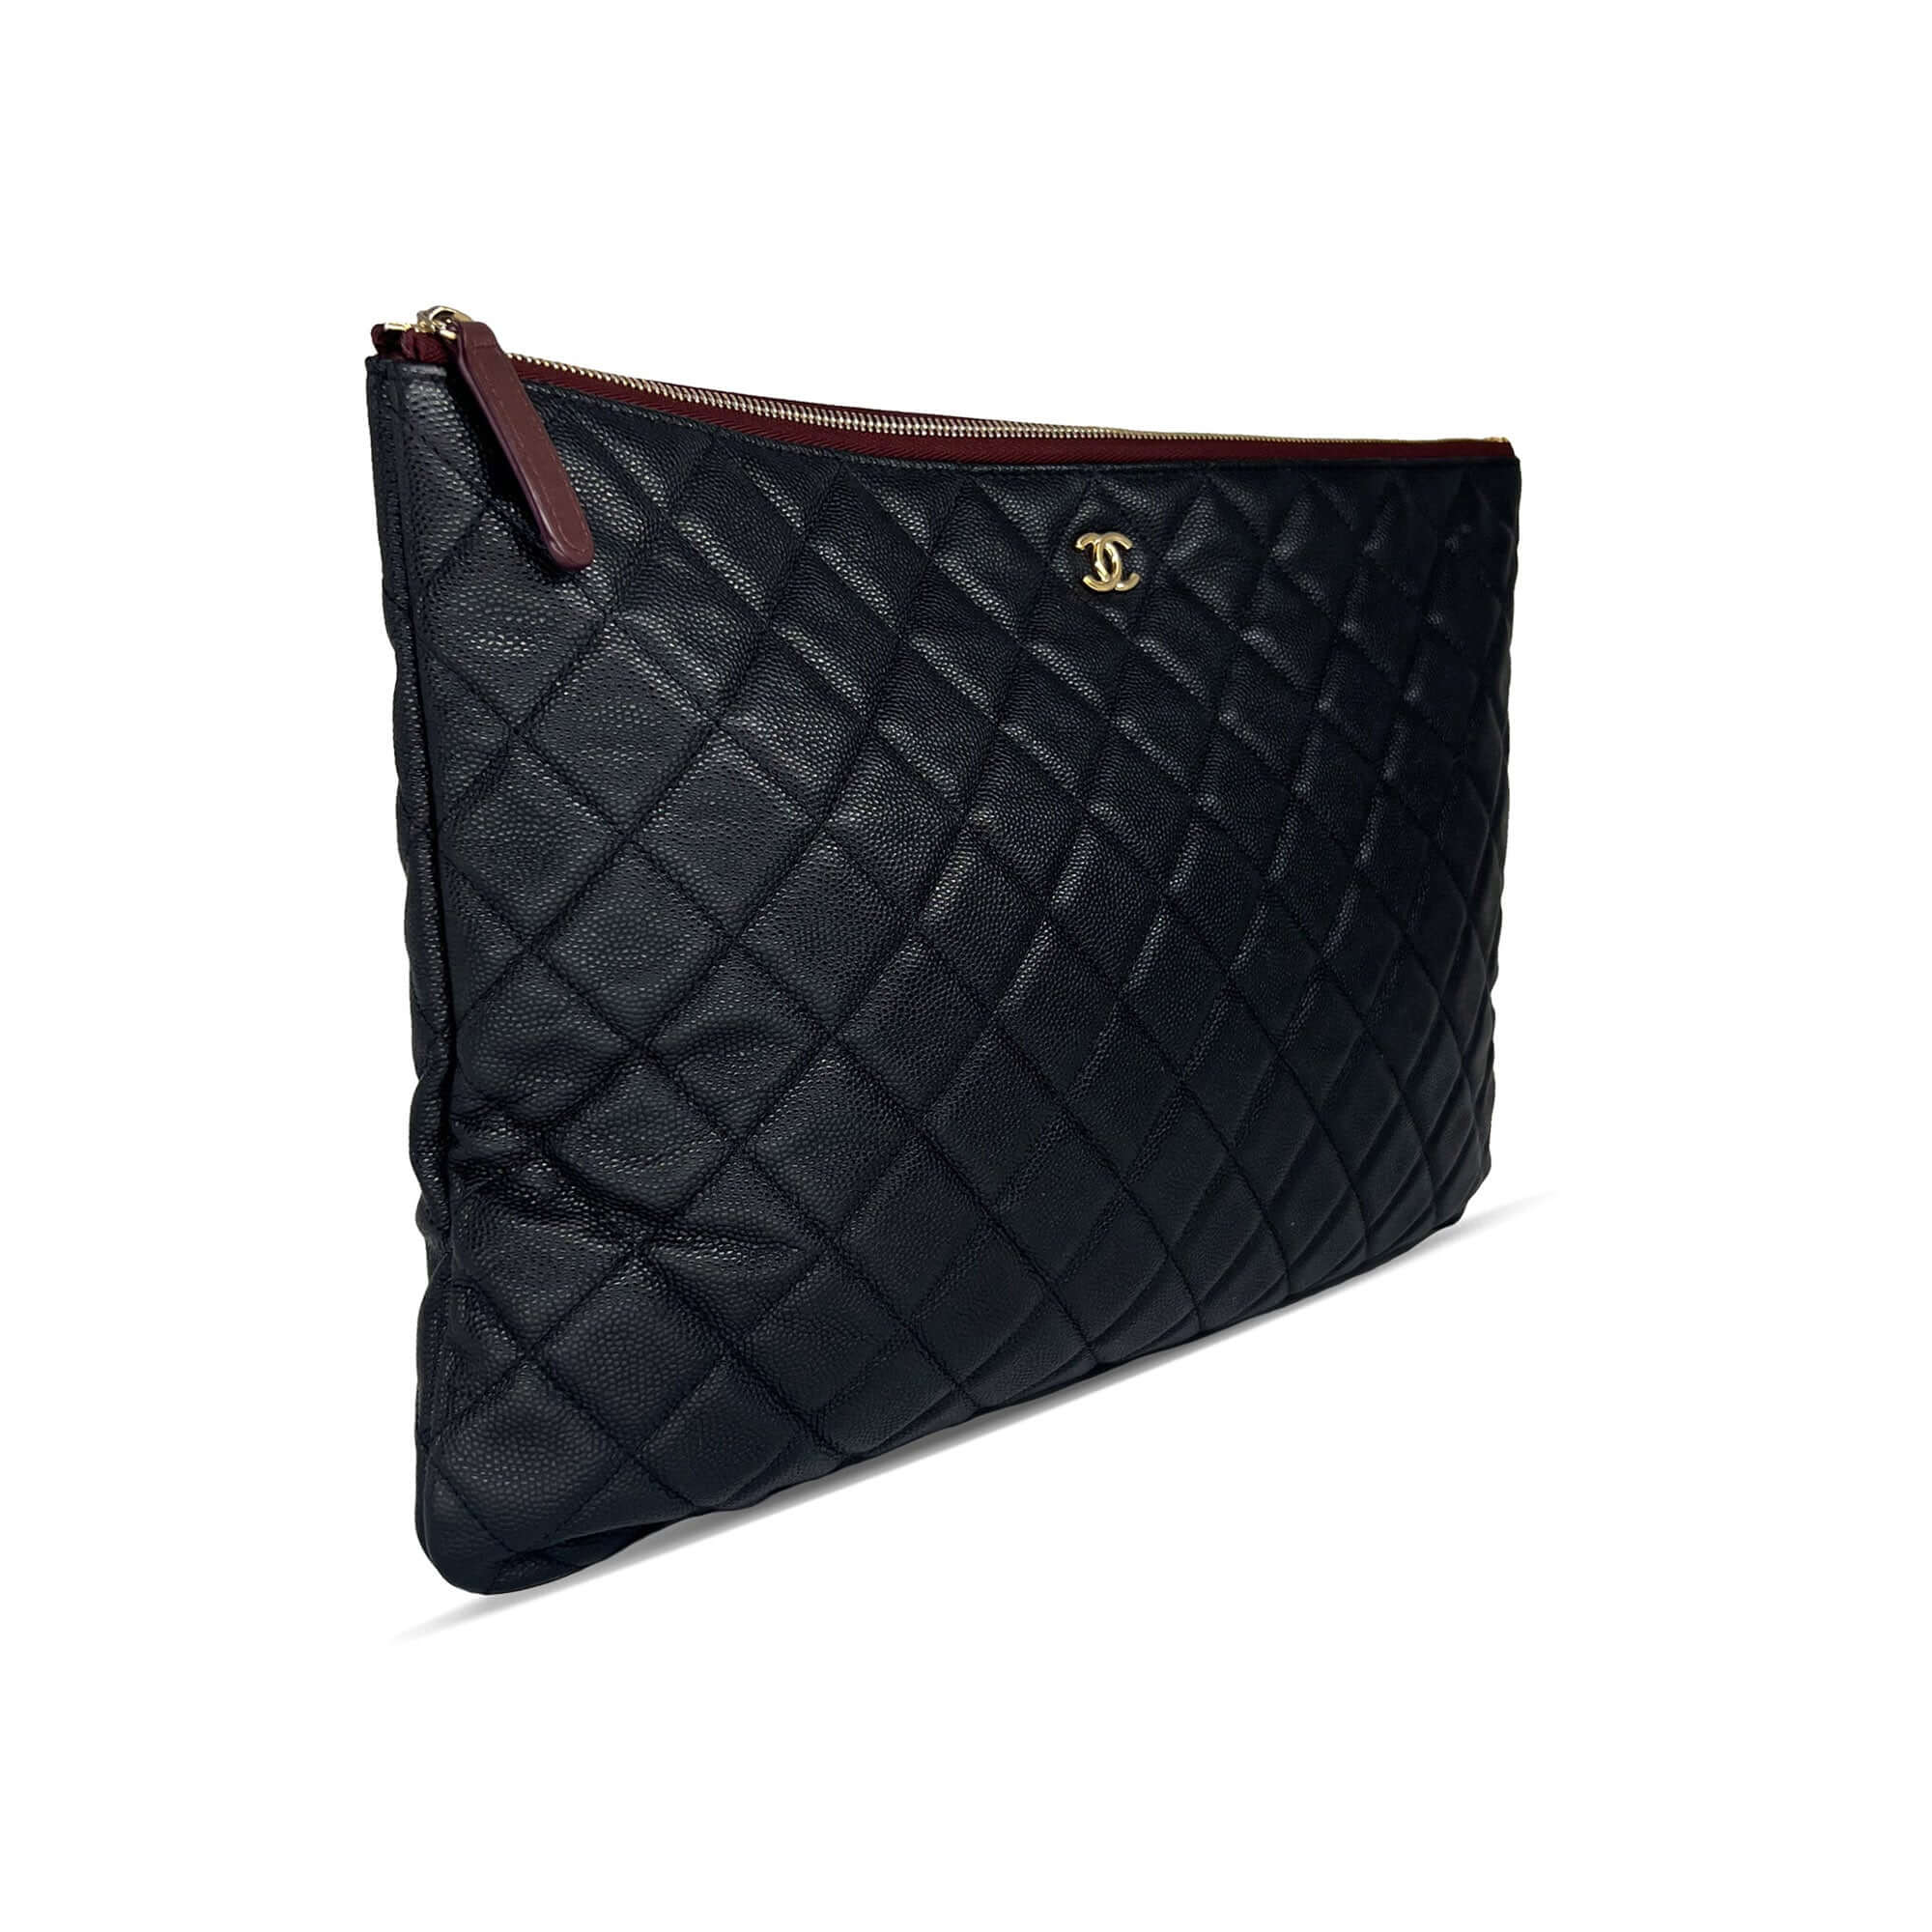 Chanel black quilted caviar leather large bag